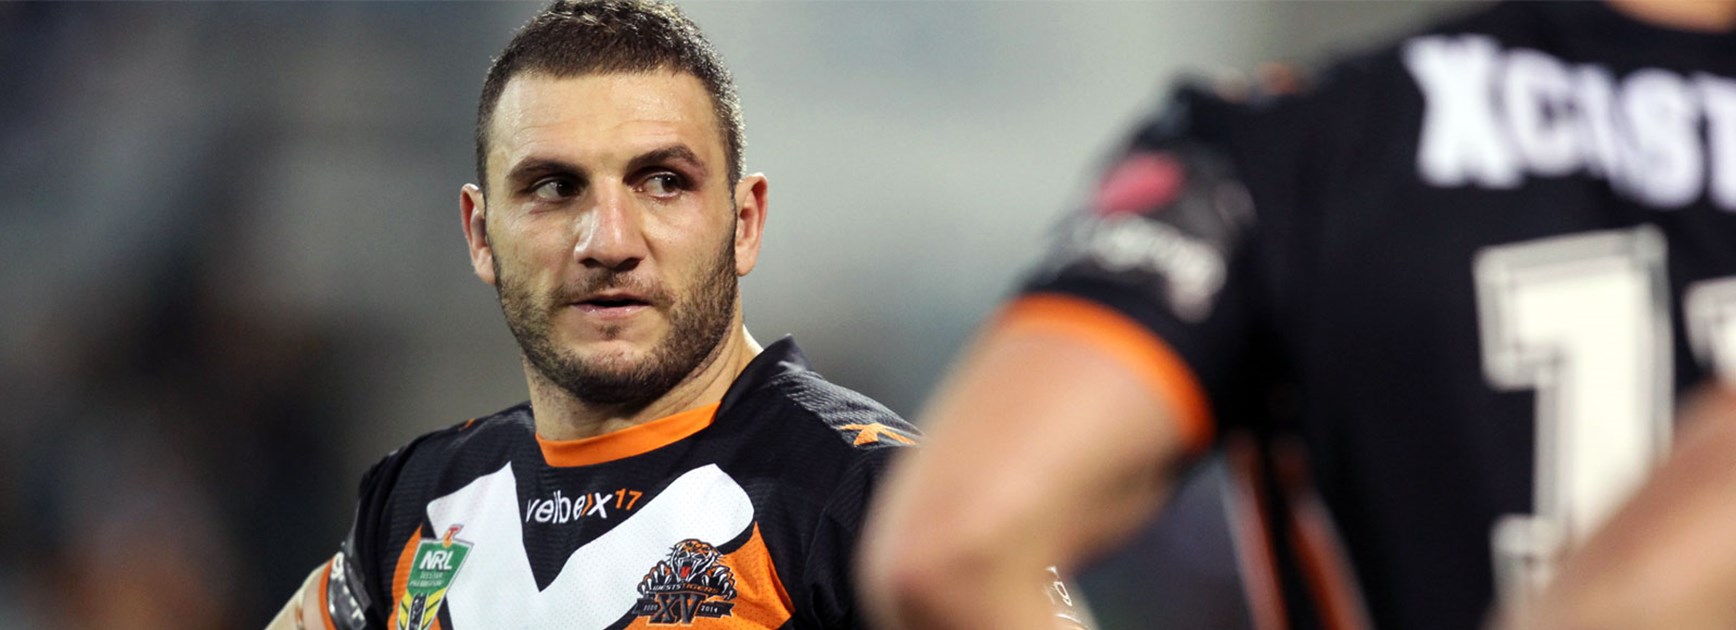 Wests Tigers skipper Robbie Farah starts the new season as the most expensive player in NRL Fantasy.